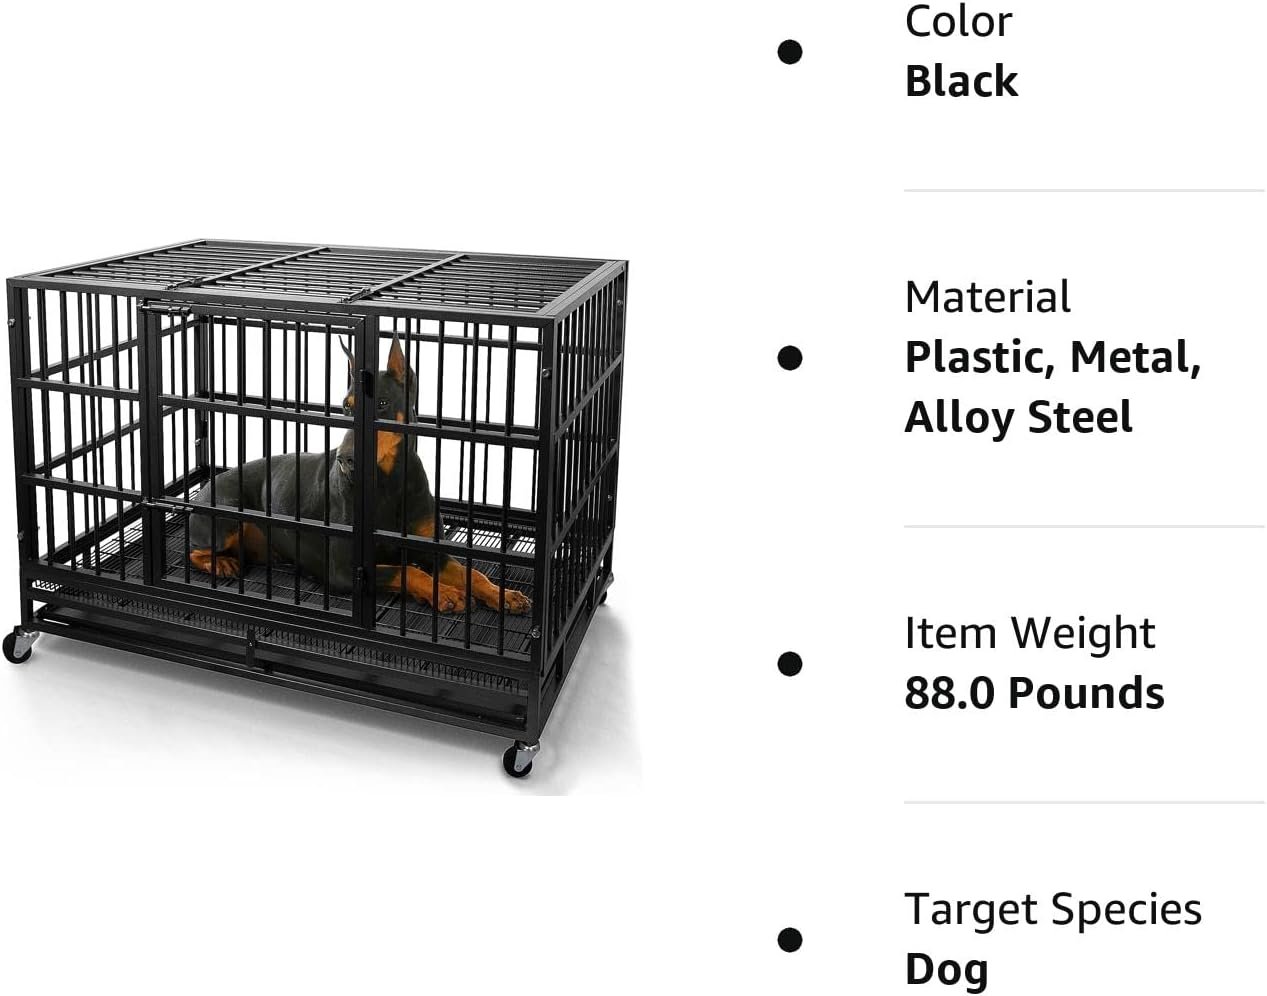 otaid 48 inch heavy duty dog crate cage kennel with wheels high anxiety indestructible dog crate sturdy locks design dou 3